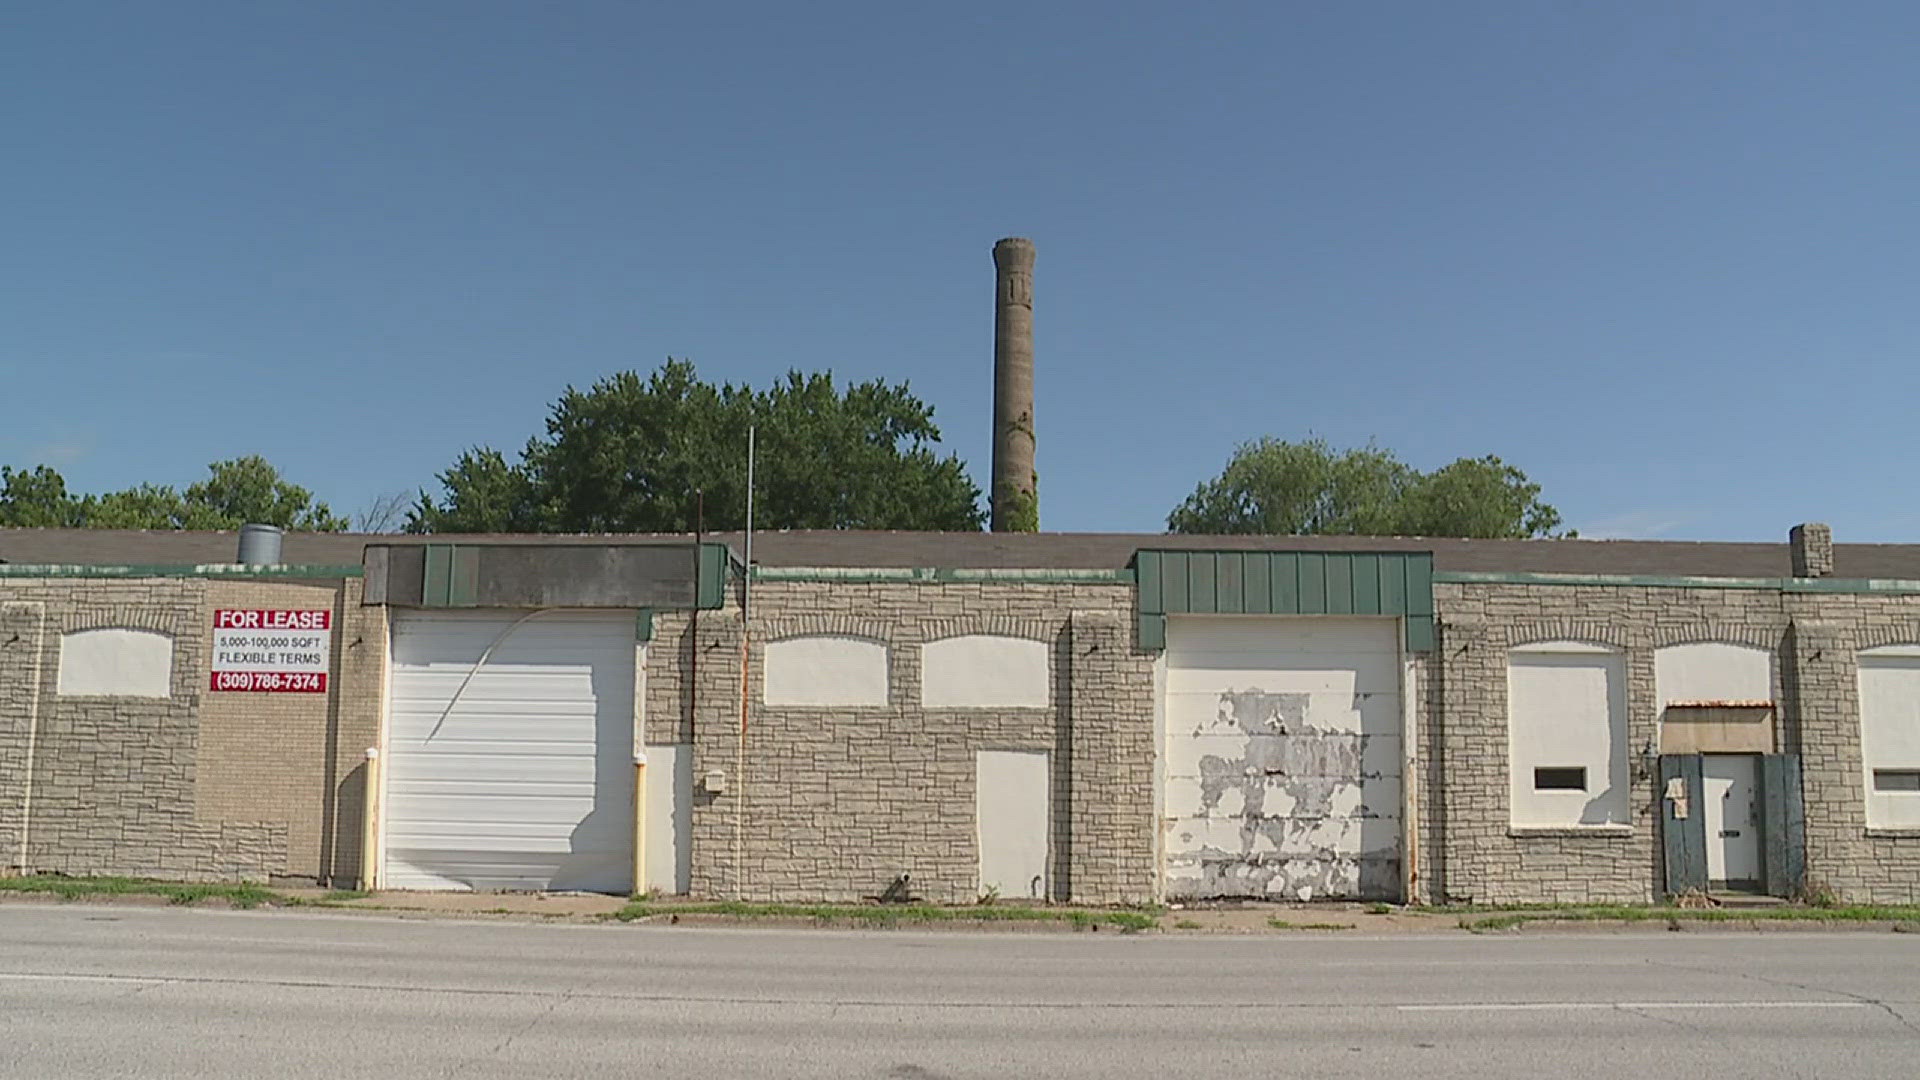 The building, located on the 1200 block of 5th Avenue, has been vacant since 2011.